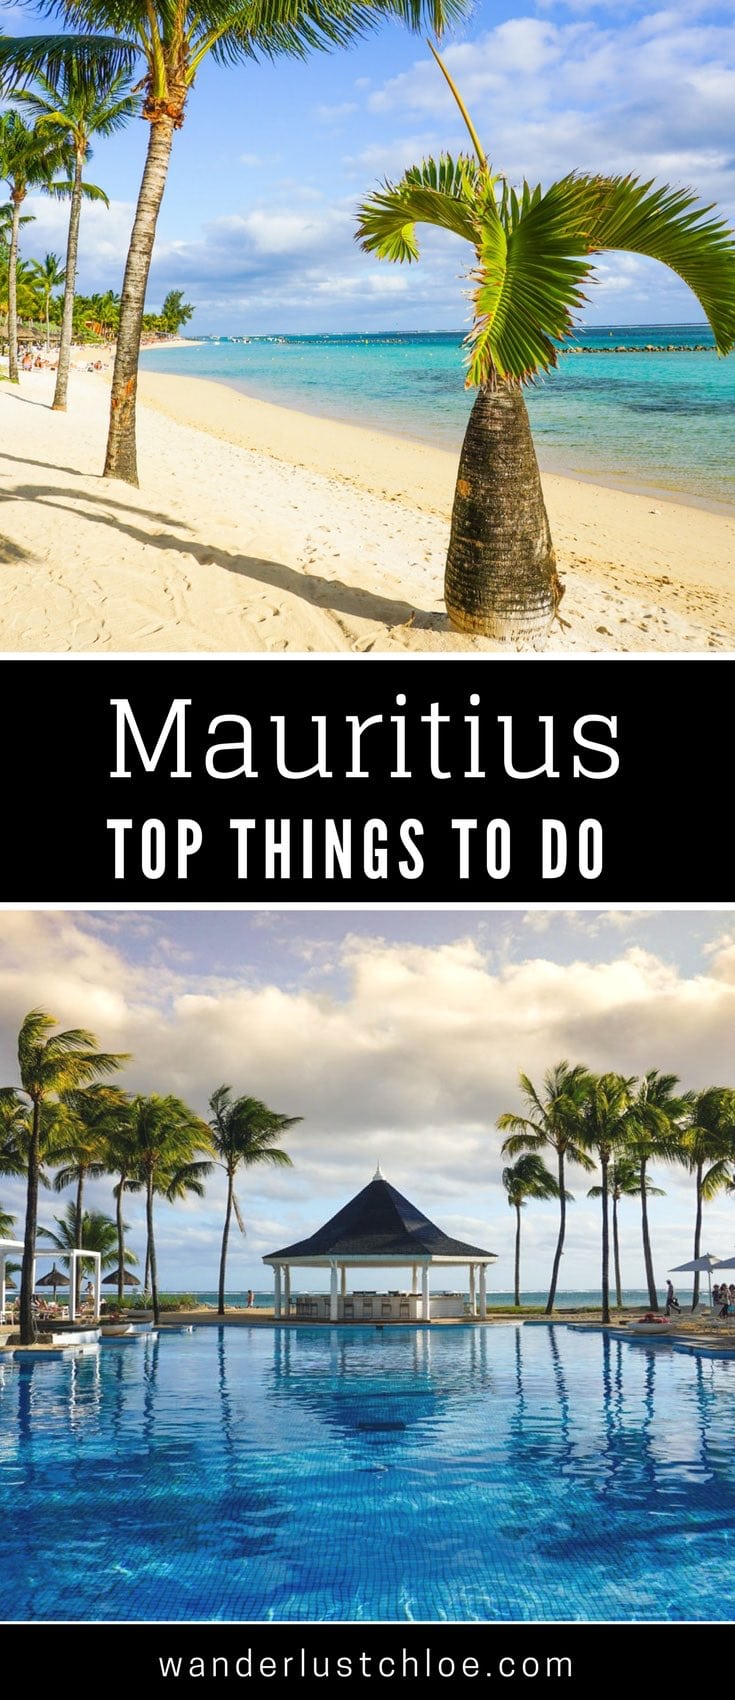  Mauritius Top Things To Do